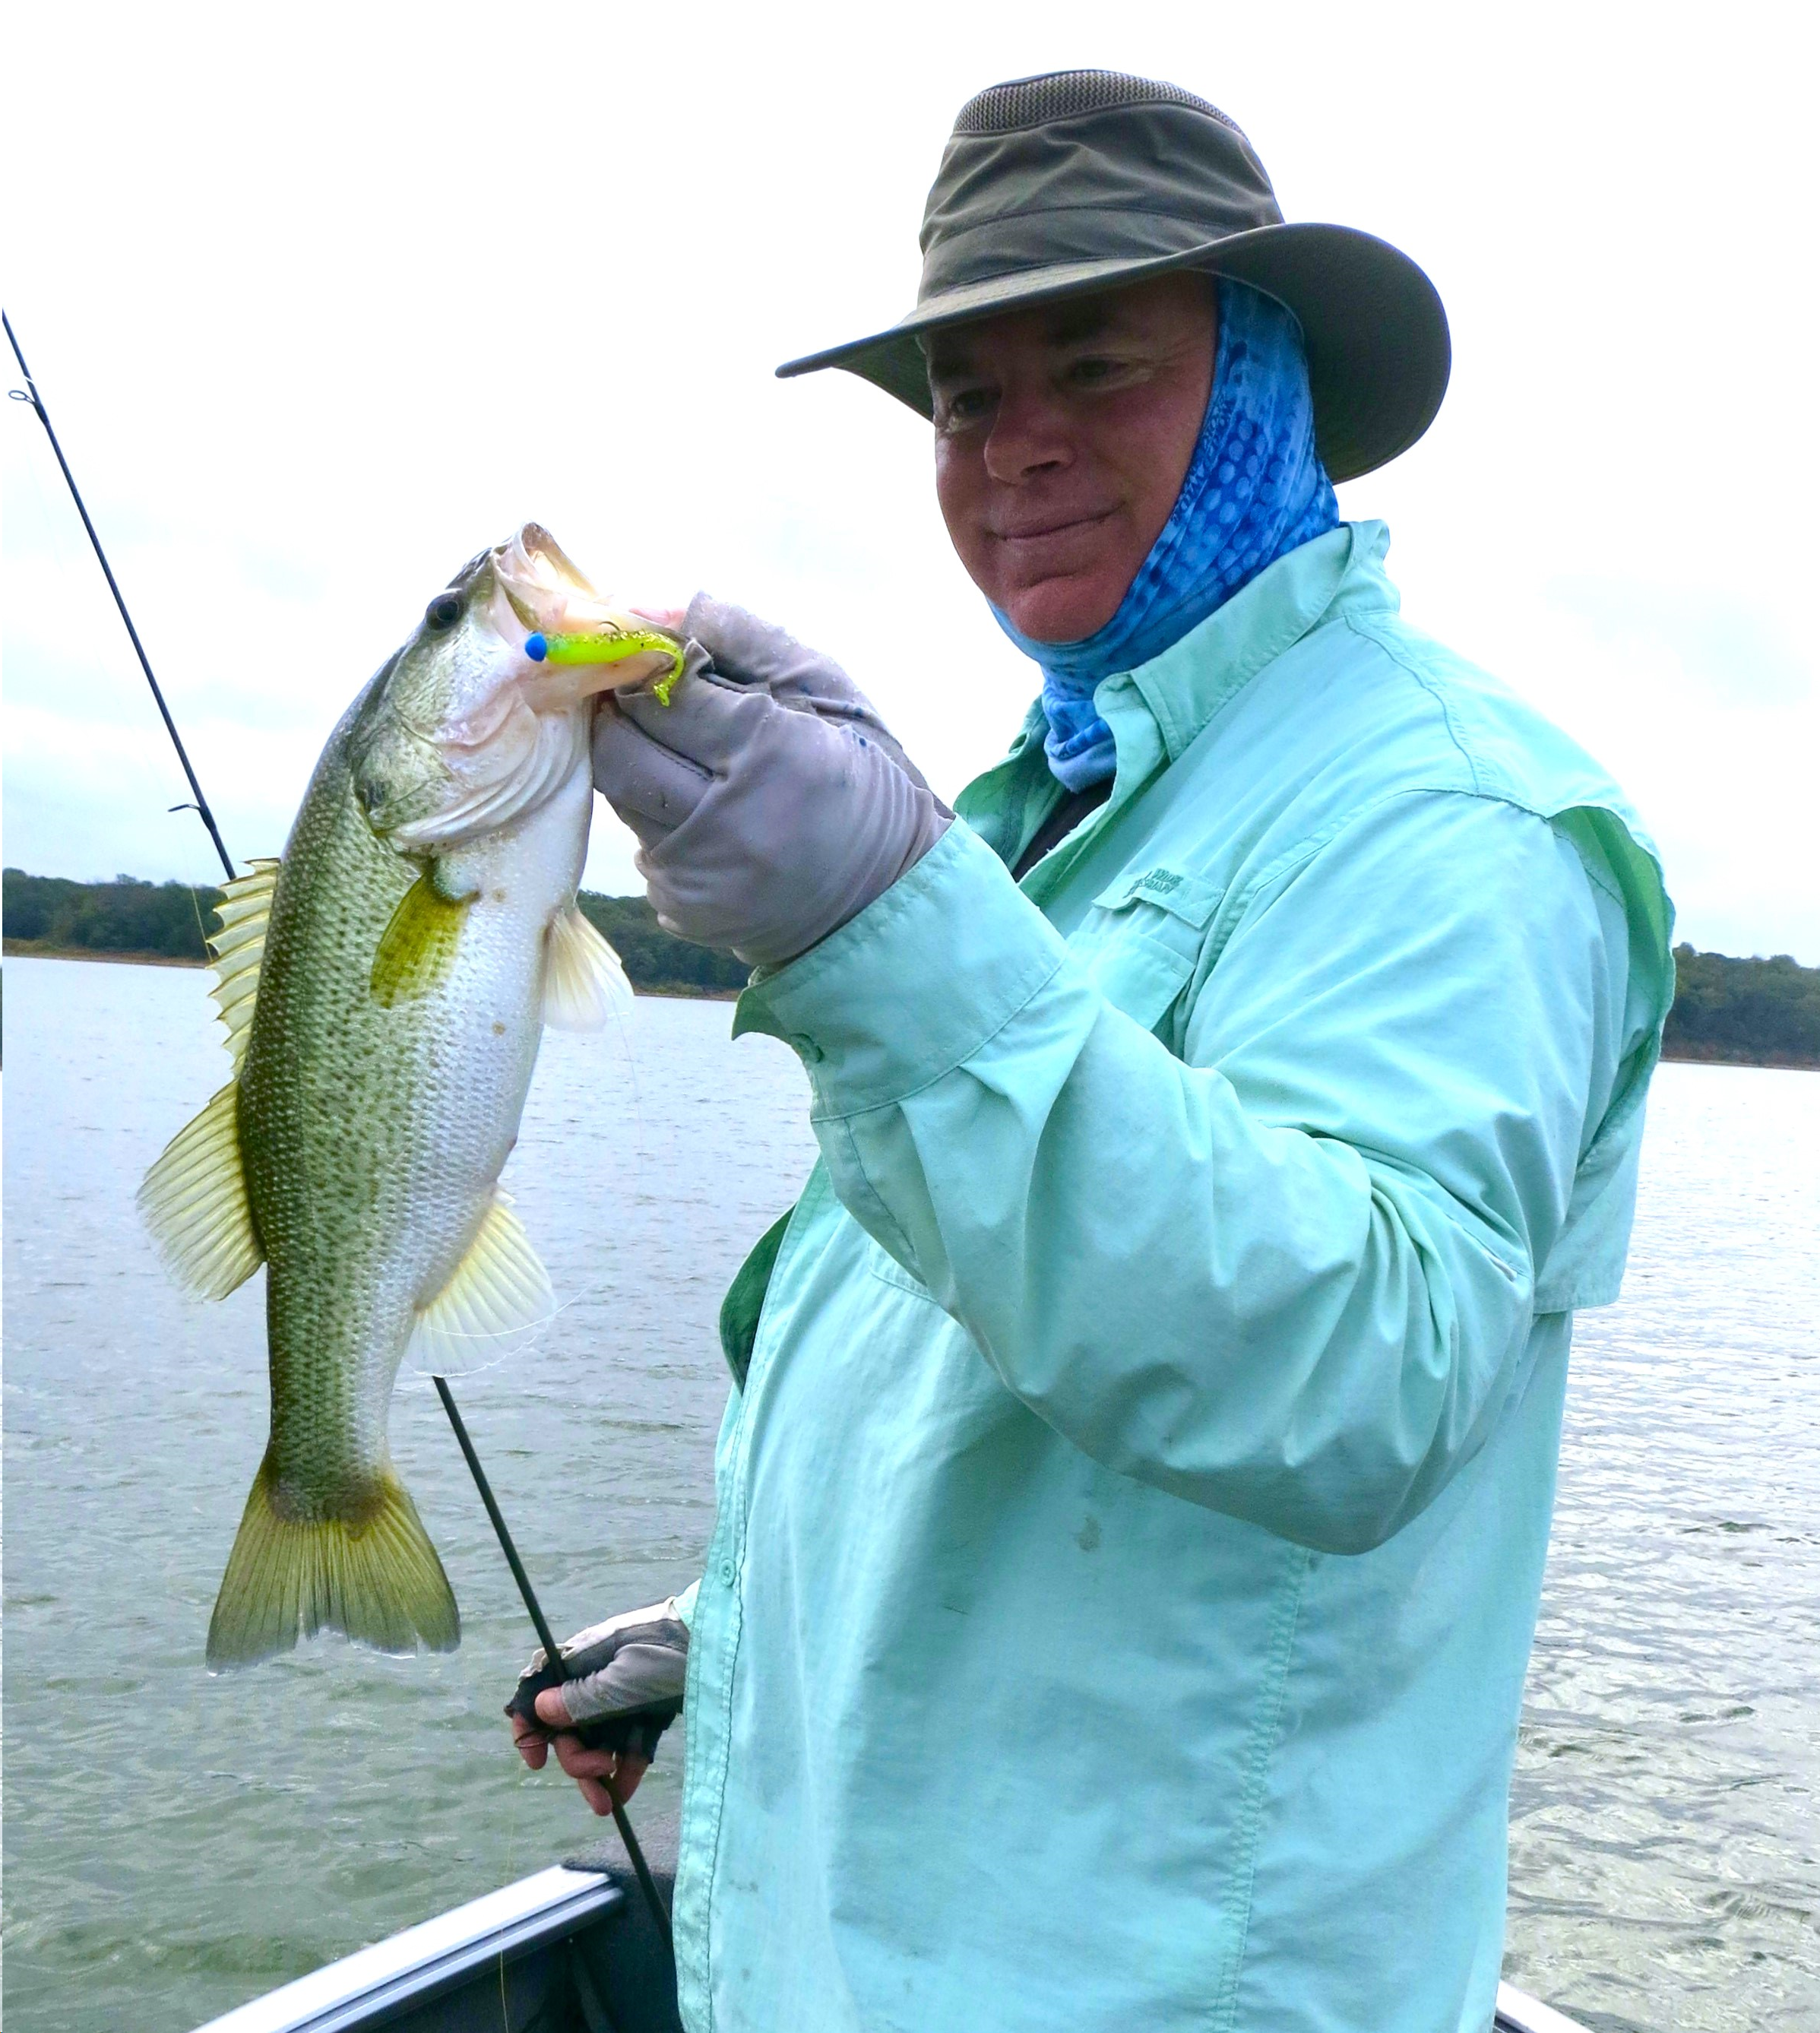 Steve with a Large mouth bass caught on October 26